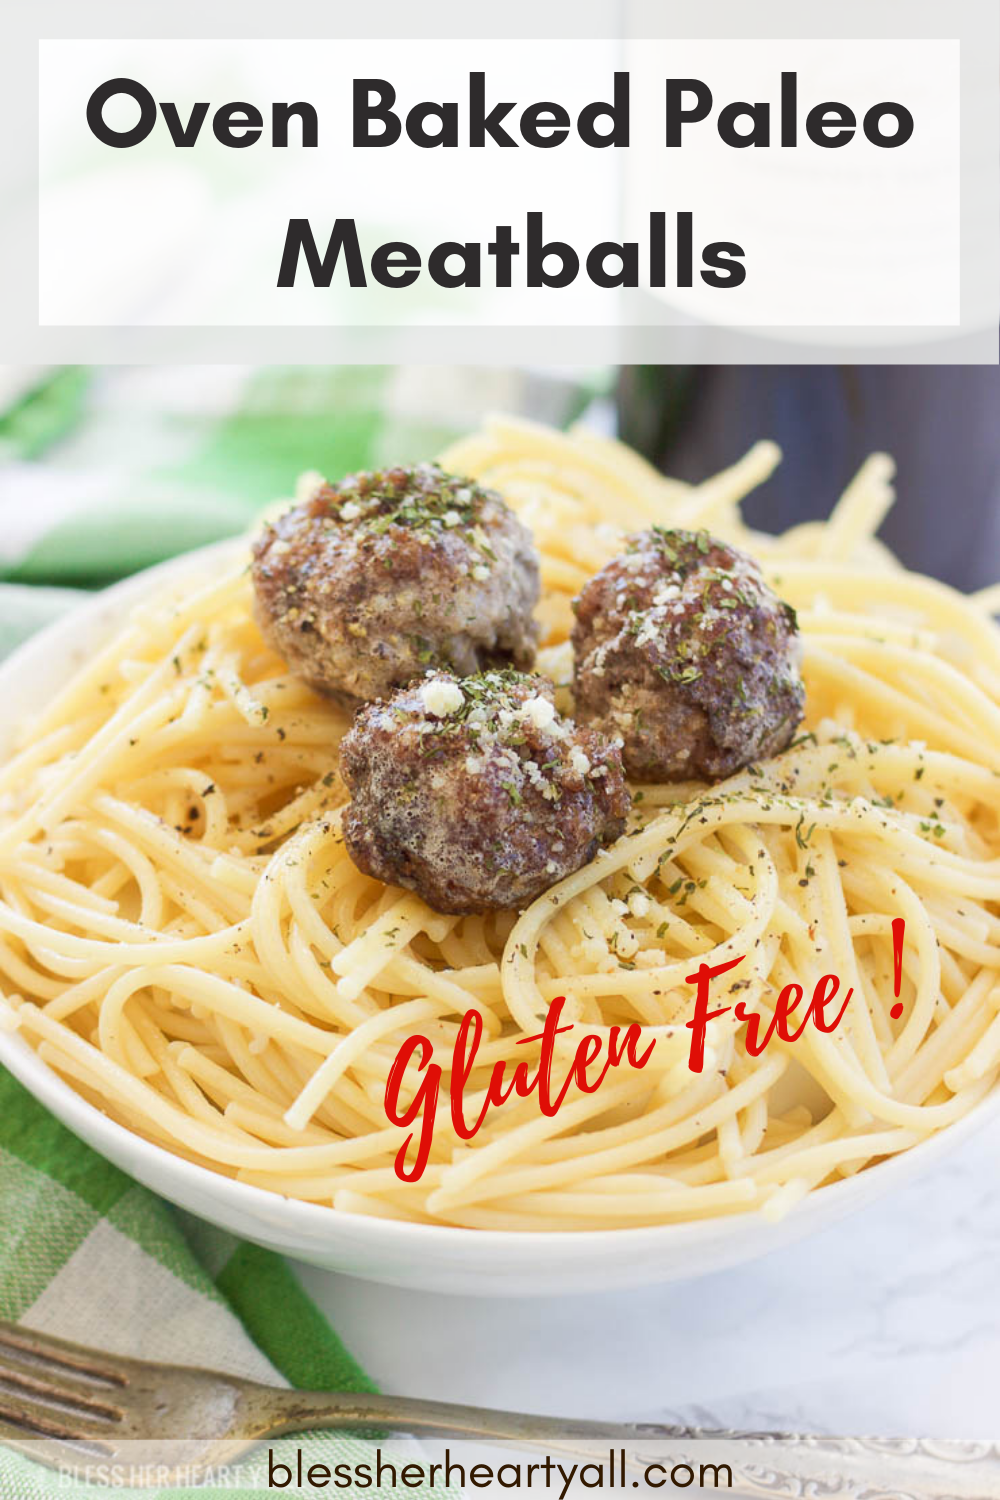 Gluten-Free Paleo Meatballs: Simple, Delicious, and Paleo too!